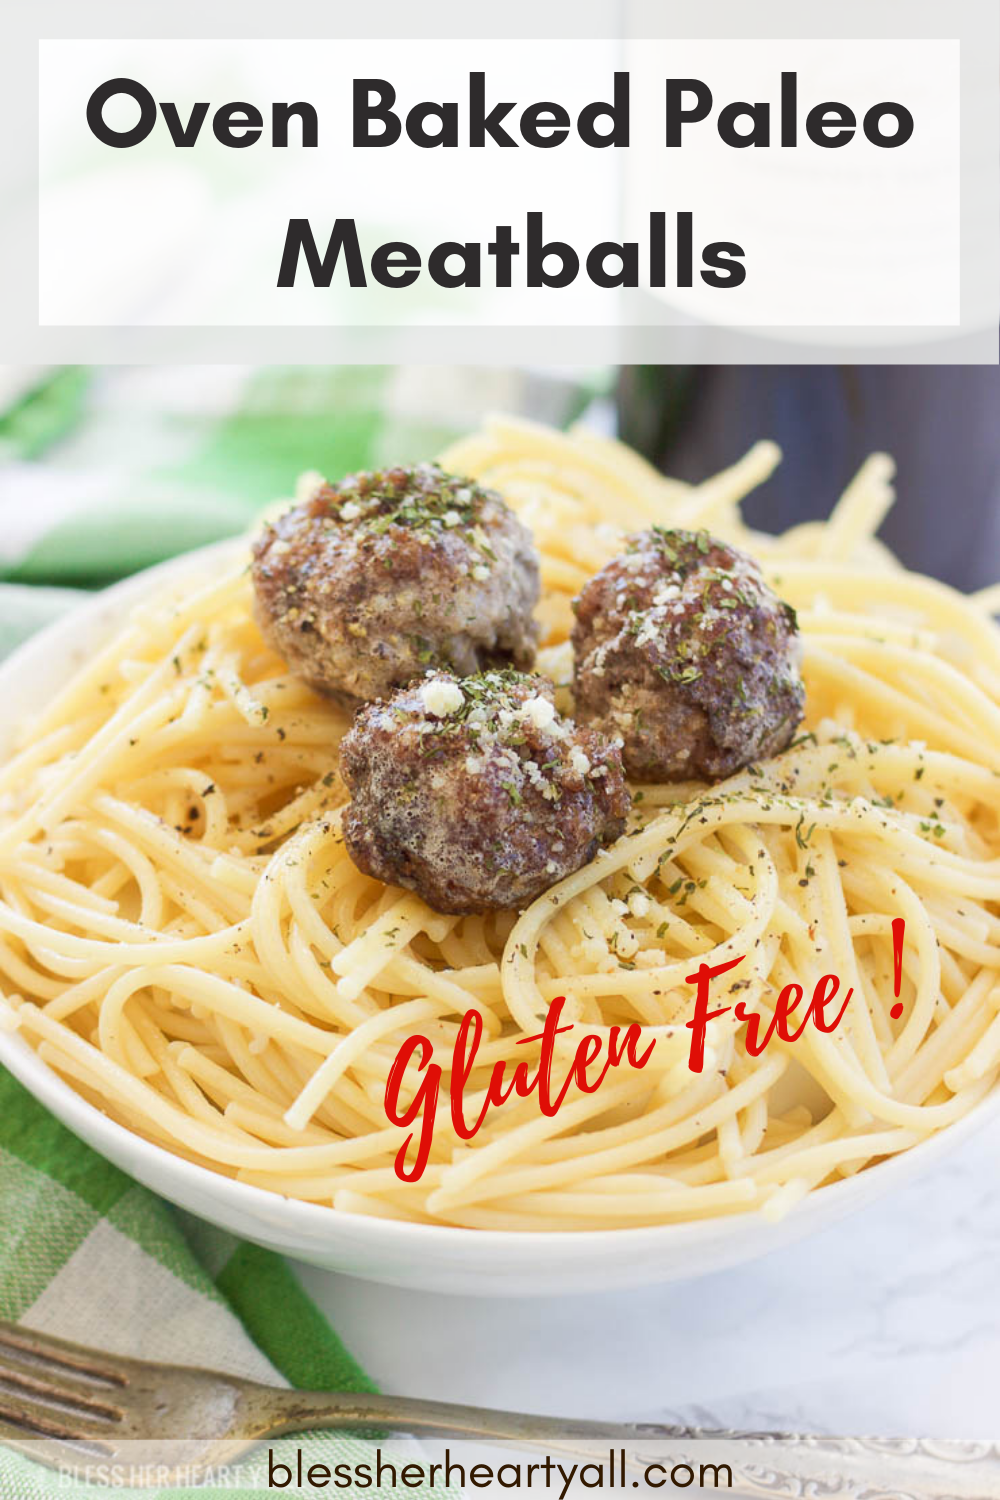 Gluten-Free Paleo Meatballs: Simple, Delicious, and Paleo too!